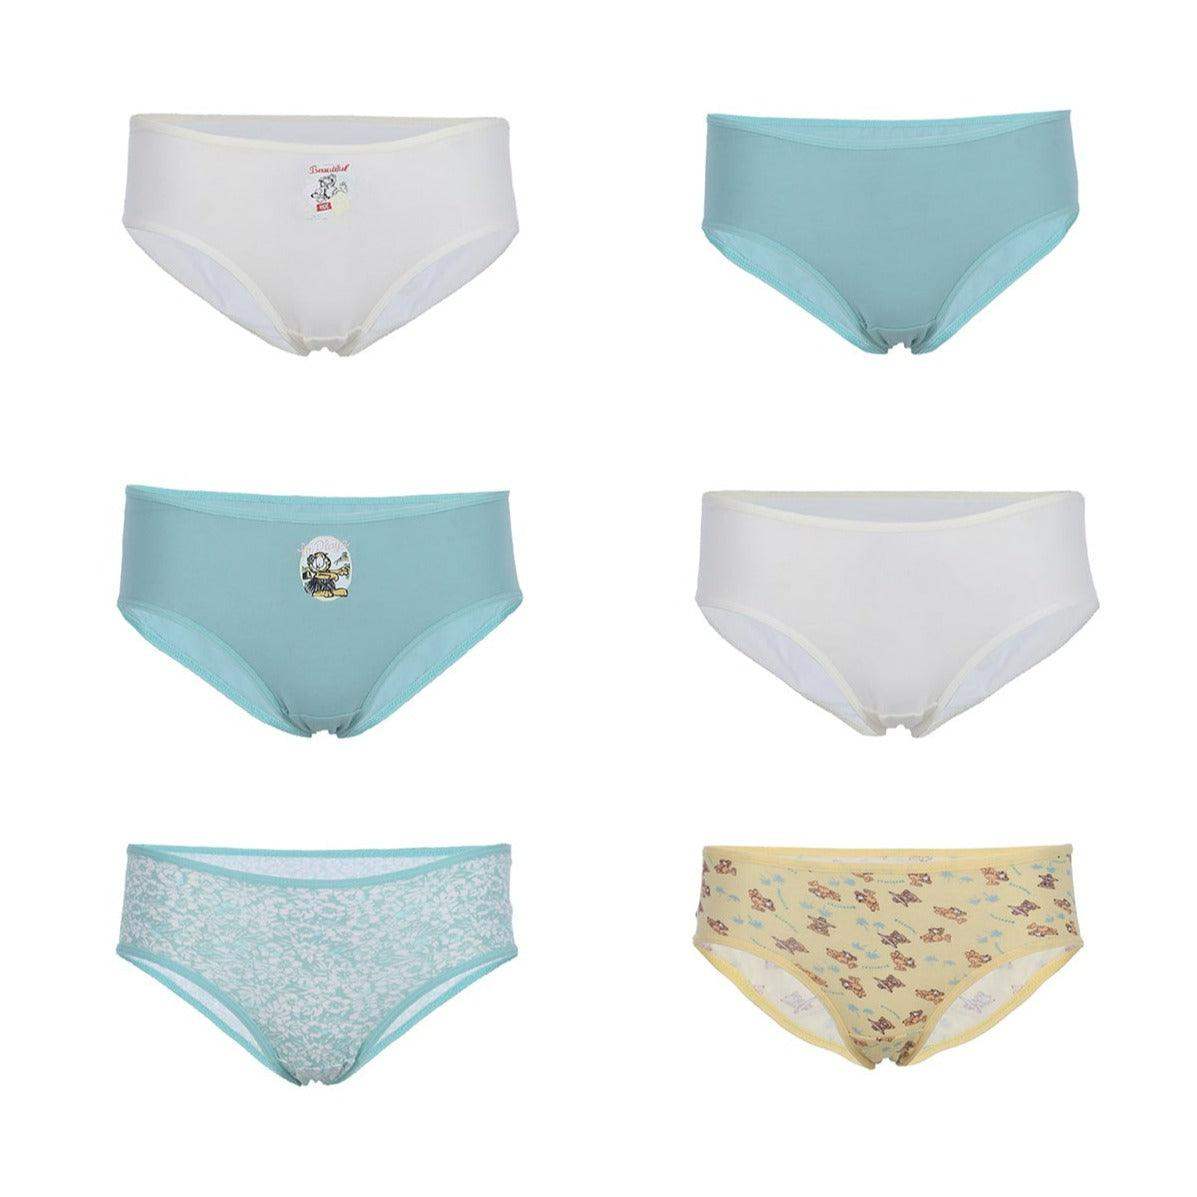 Girly Cotton Briefs (Pack of 6) - Carina - كارينا